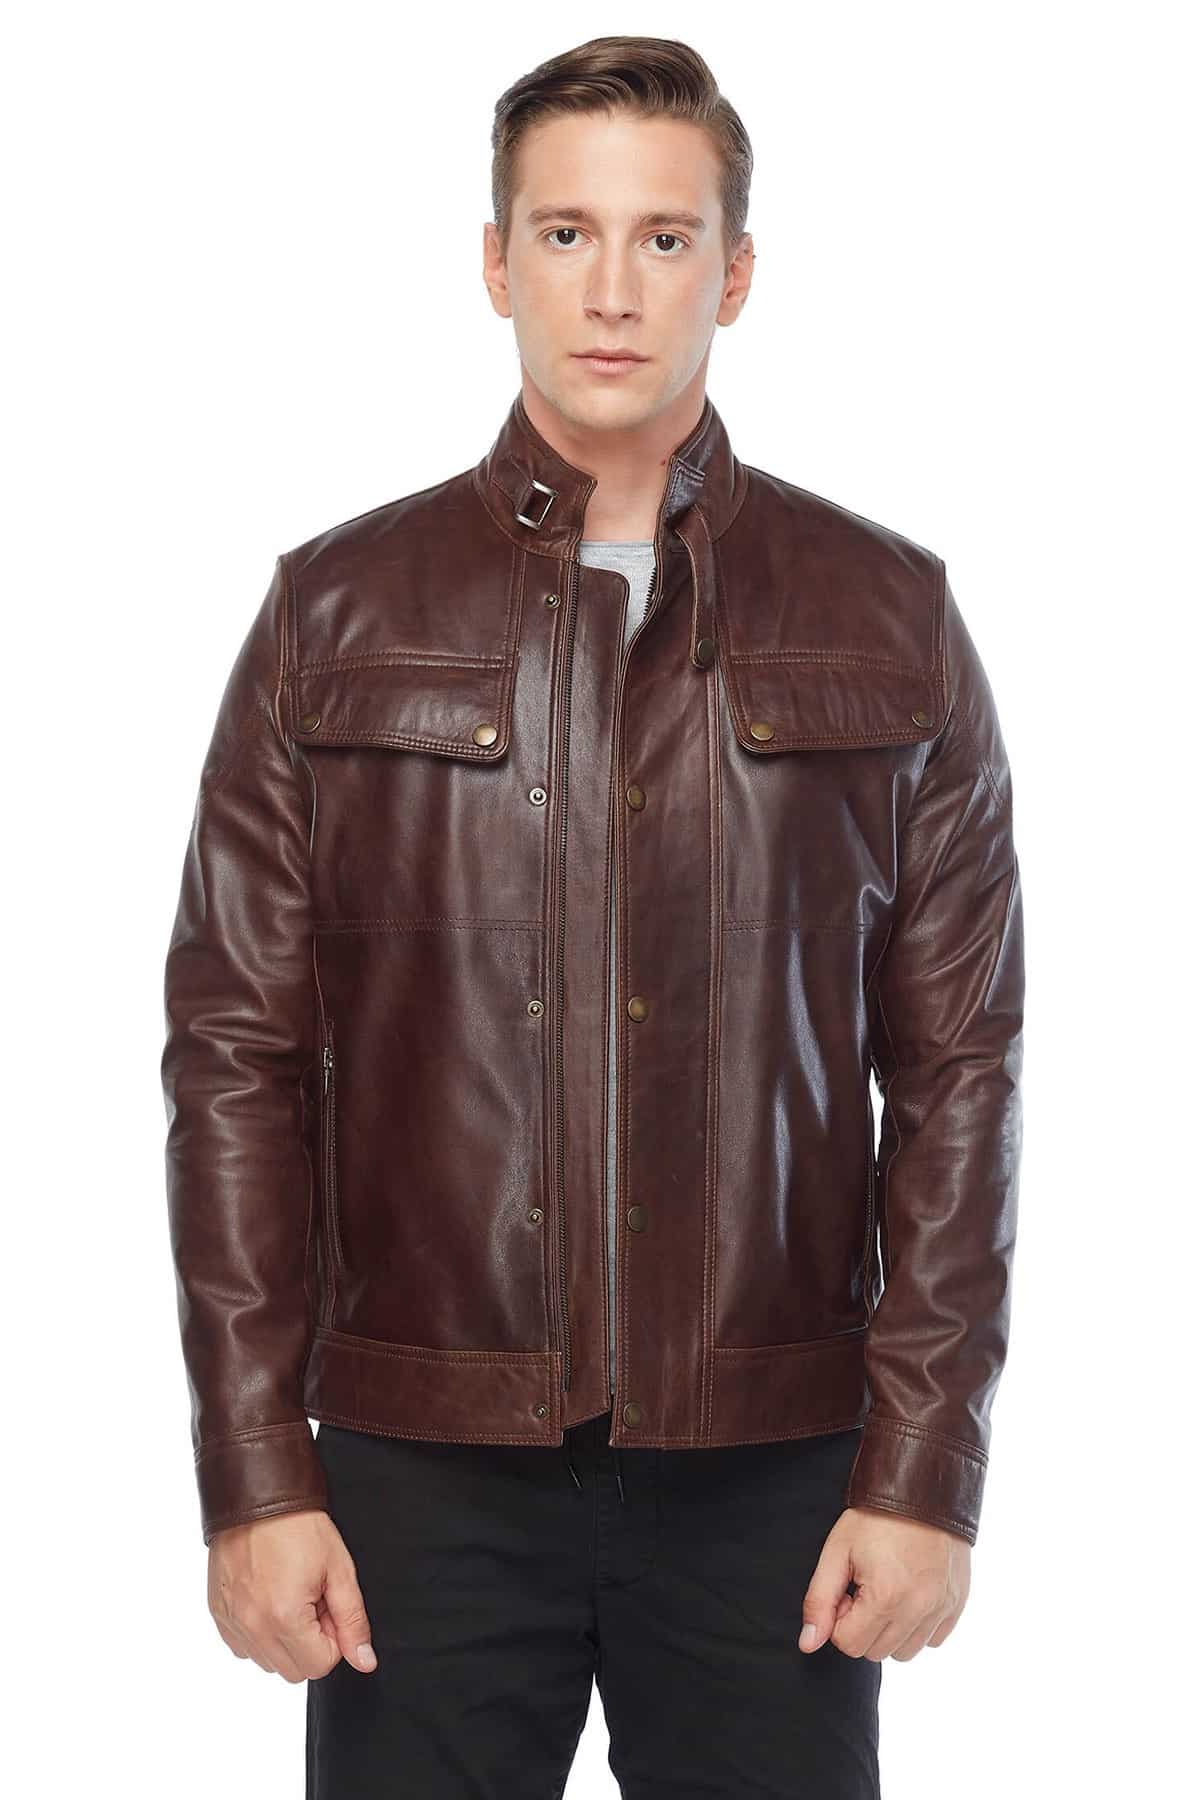 Brooklyn Beckham Men's 100 % Real Brown Leather Jacket